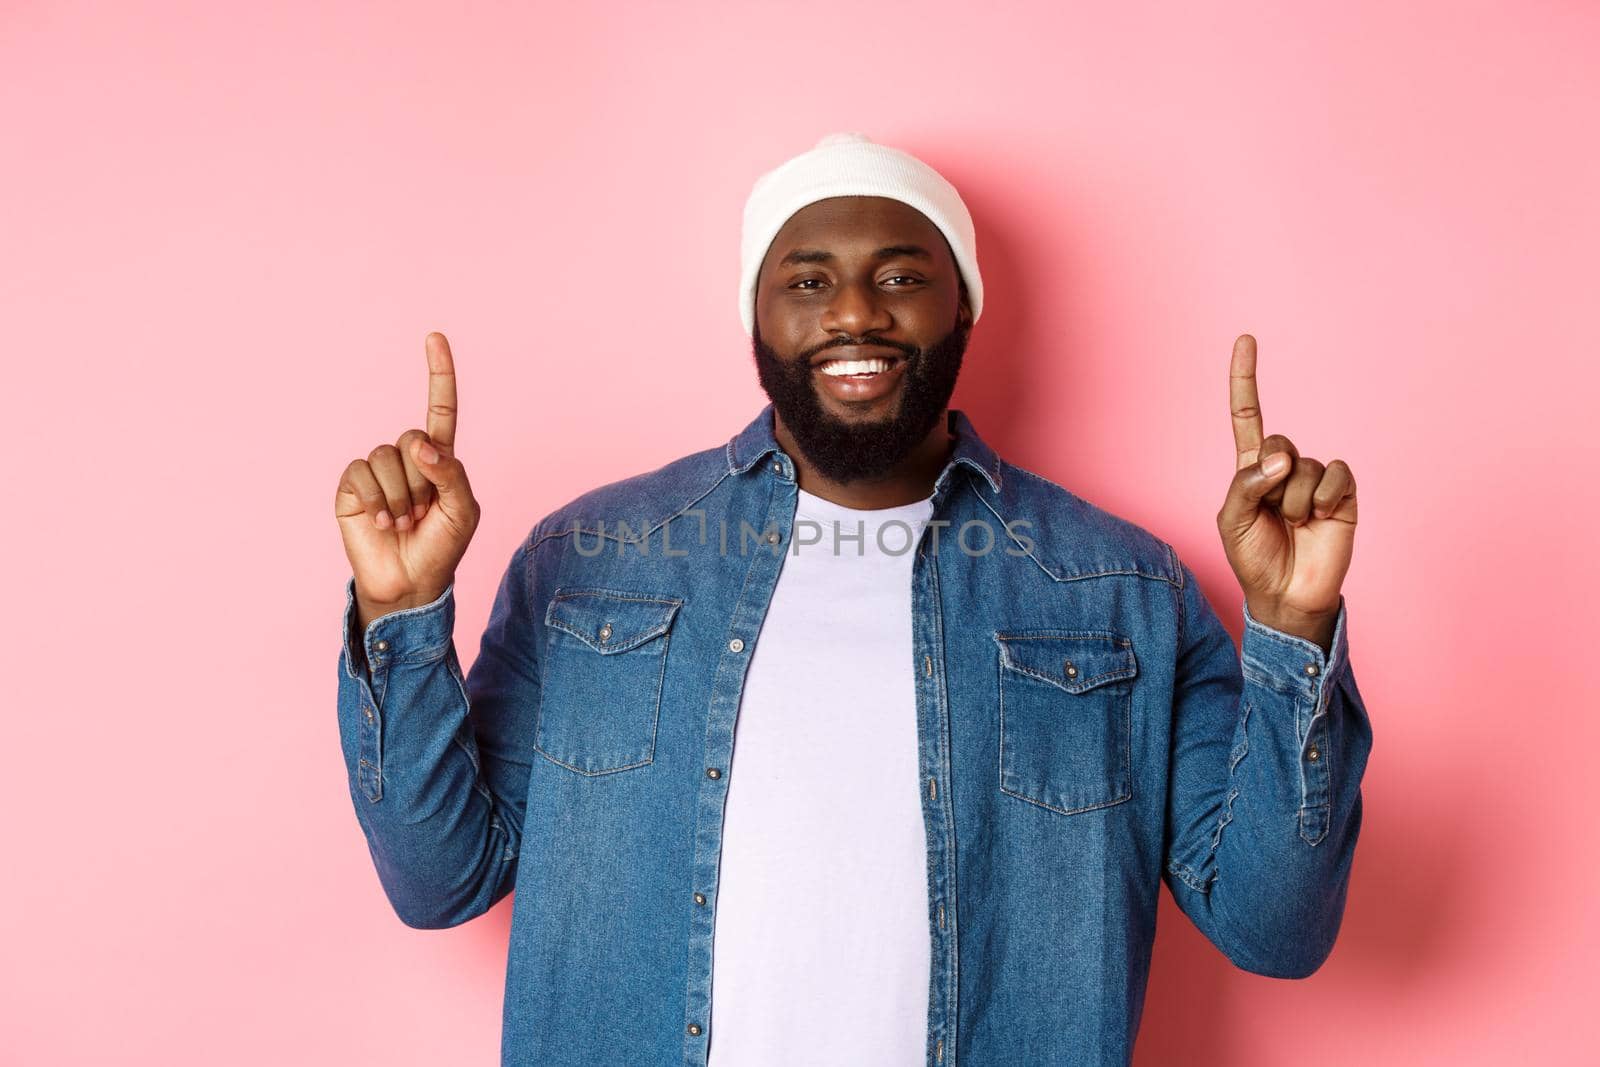 Handsome happy african-american man pointing fingers up, smiling and showing promo offer, wearing hipster beanie and denim shirt, pink background.